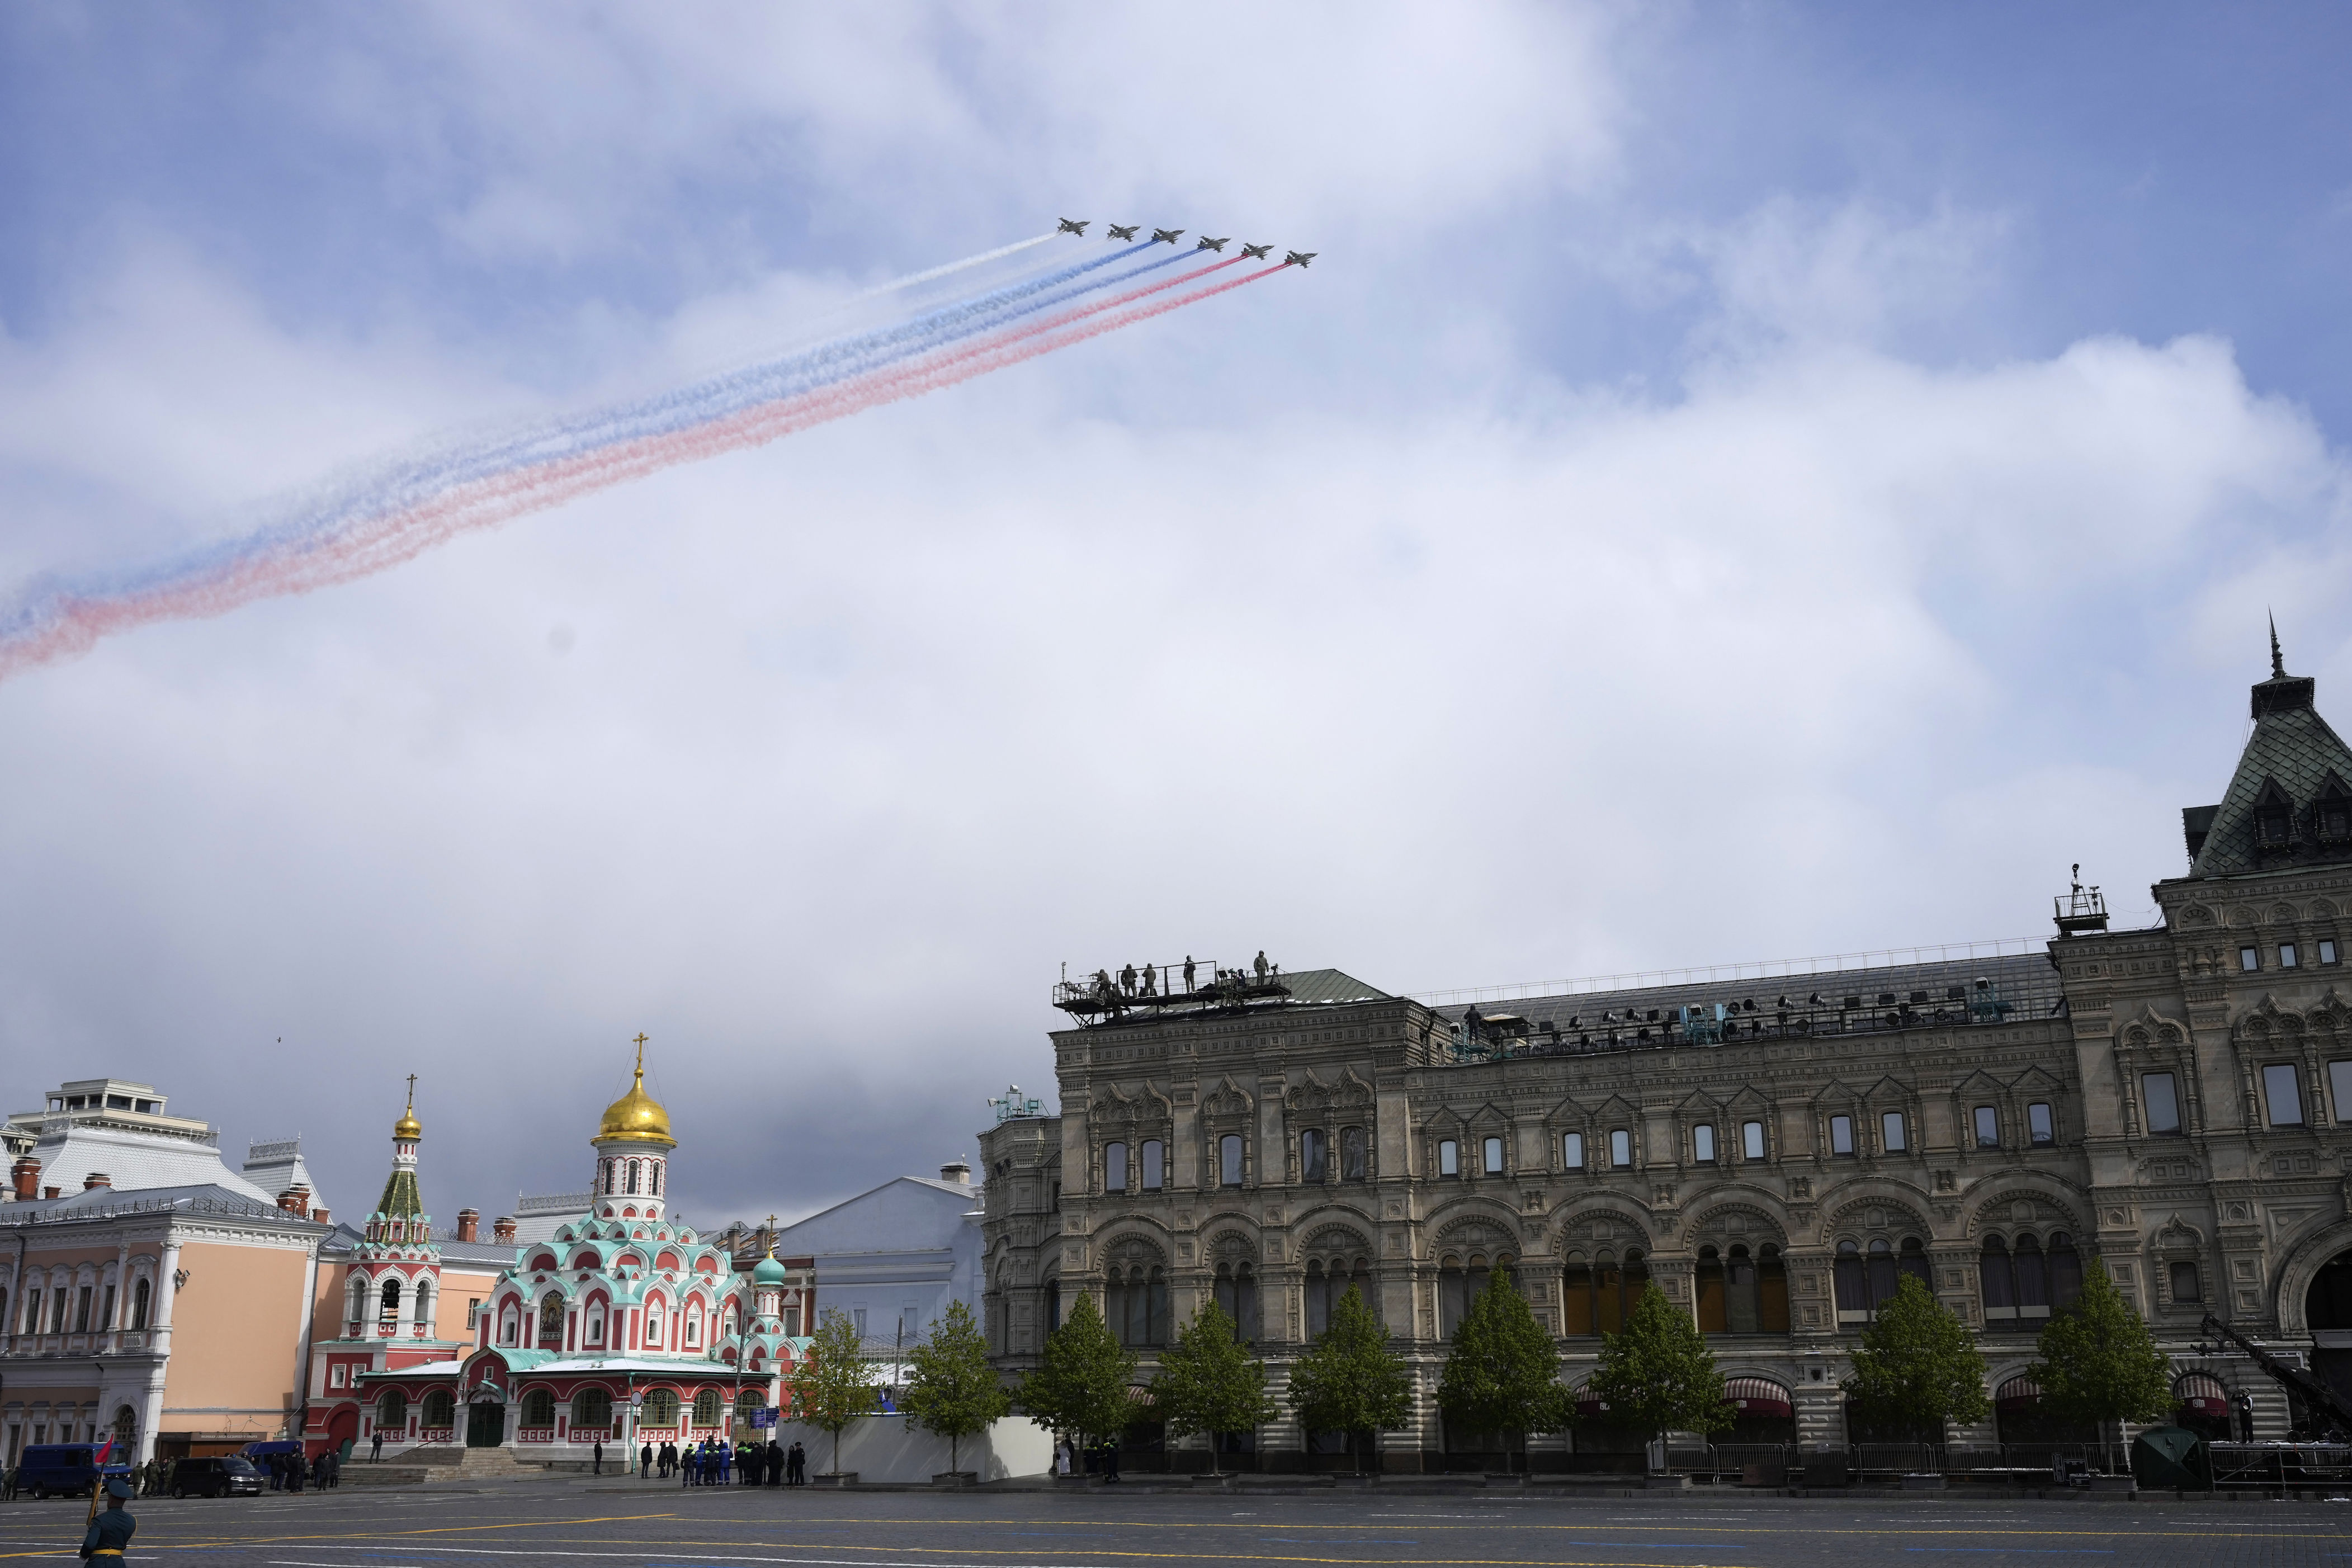 emboldened russia marks victory day with parade of nuclear-capable weapons